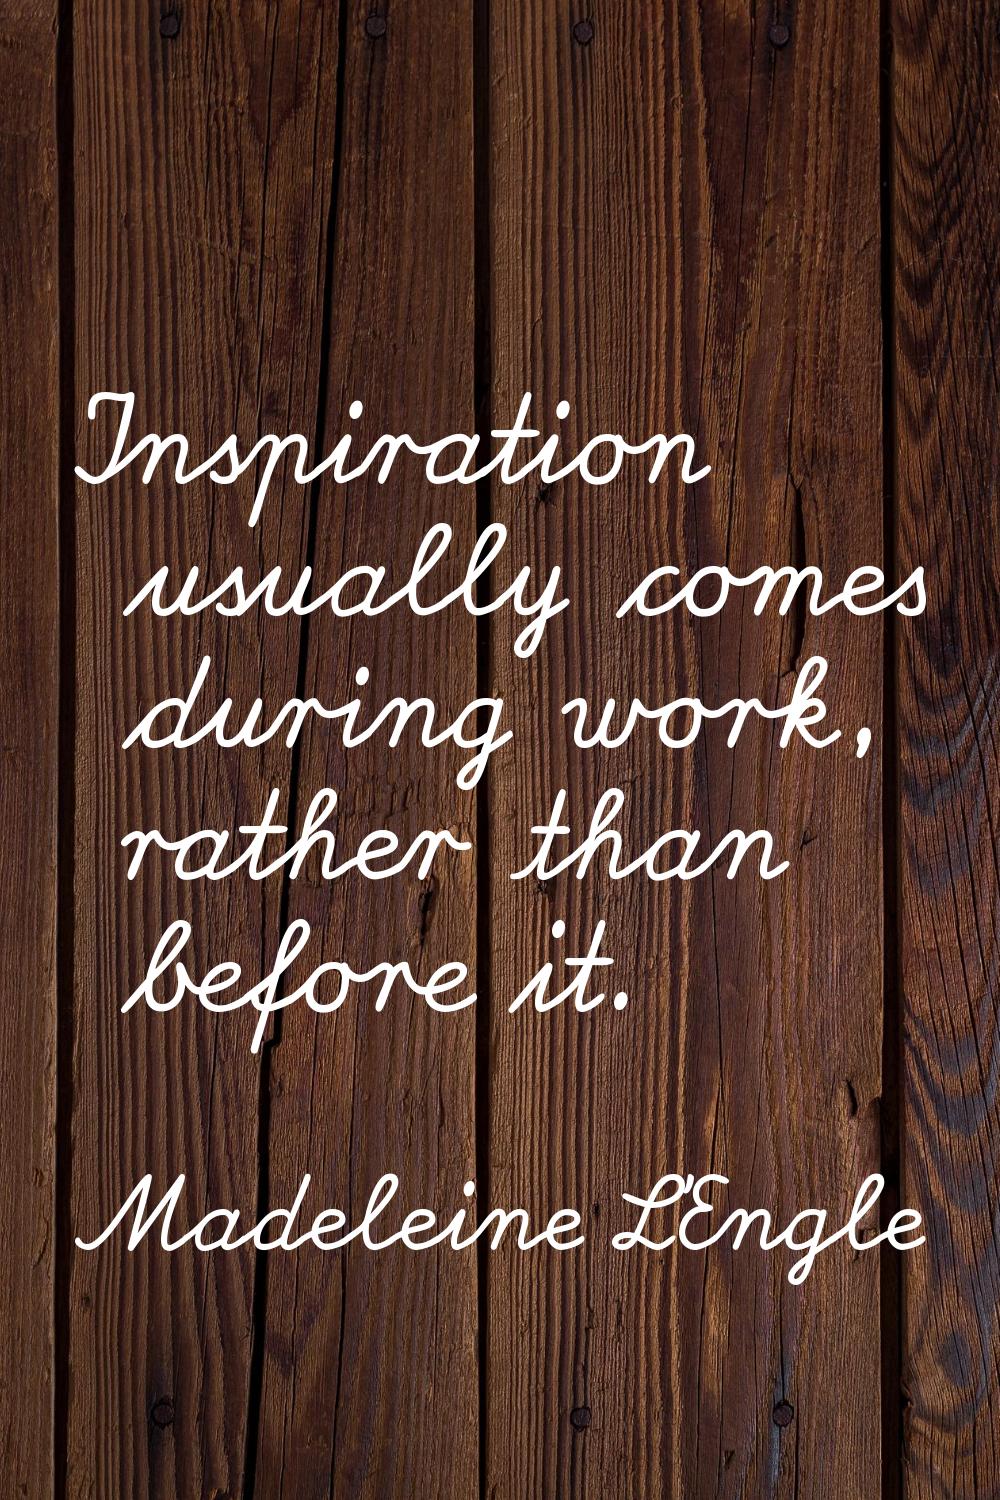 Inspiration usually comes during work, rather than before it.